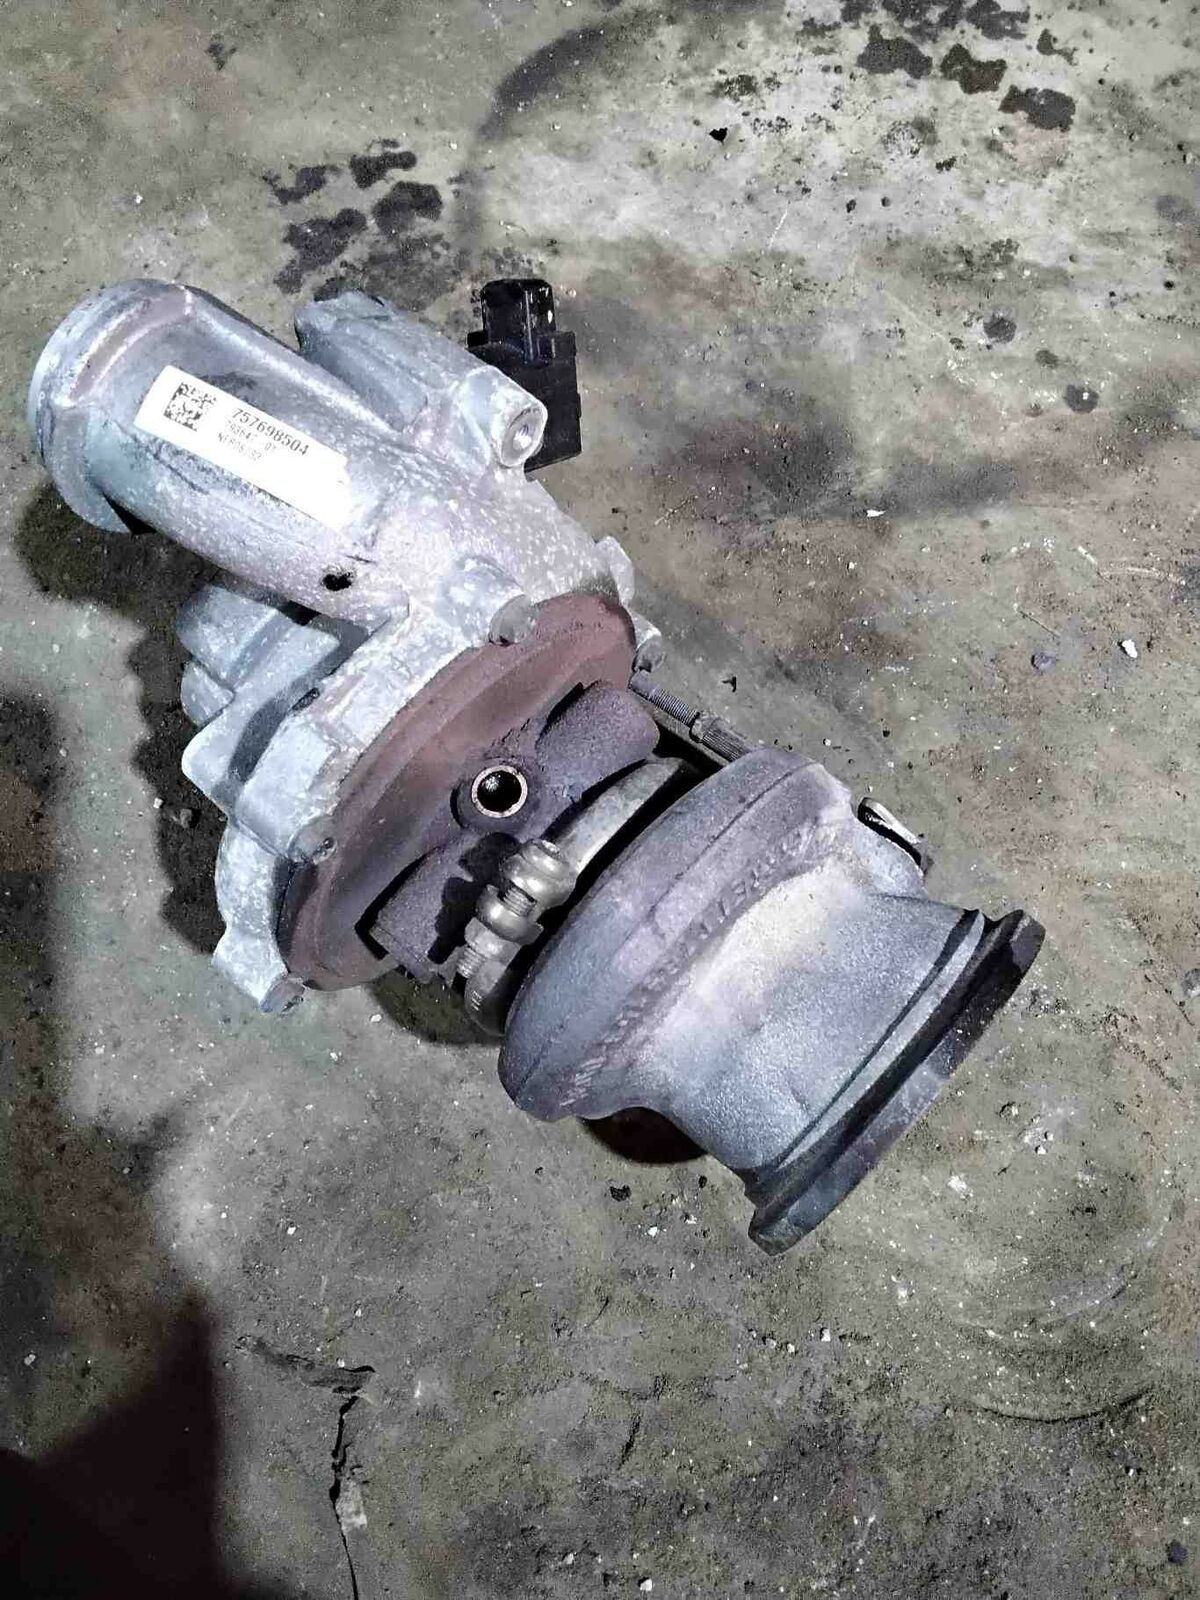 Turbo/supercharger BMW 750 SERIES 09 10 11 12 146k